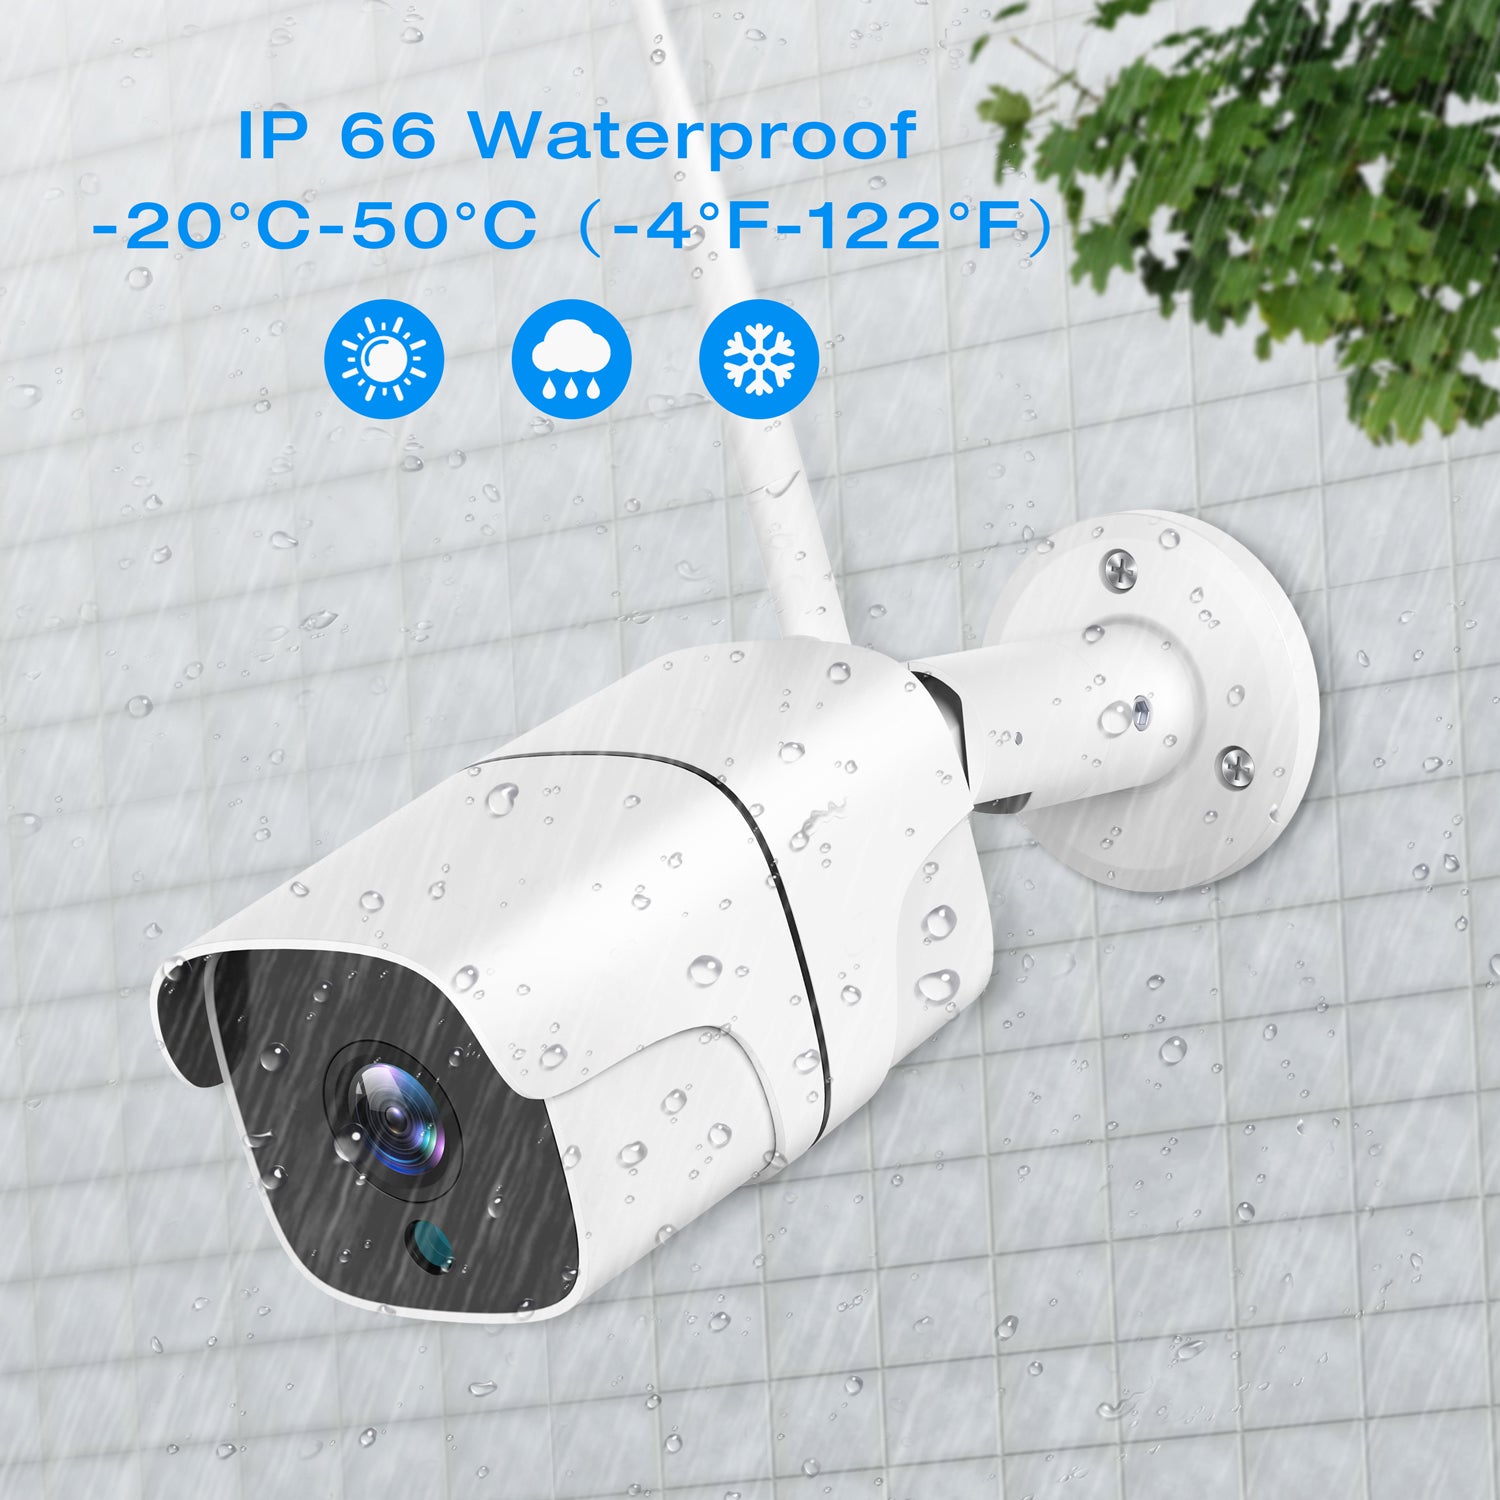 A Single Security Camera For Toguard W300/W400 Security System( Only Available In the Canada and UK)